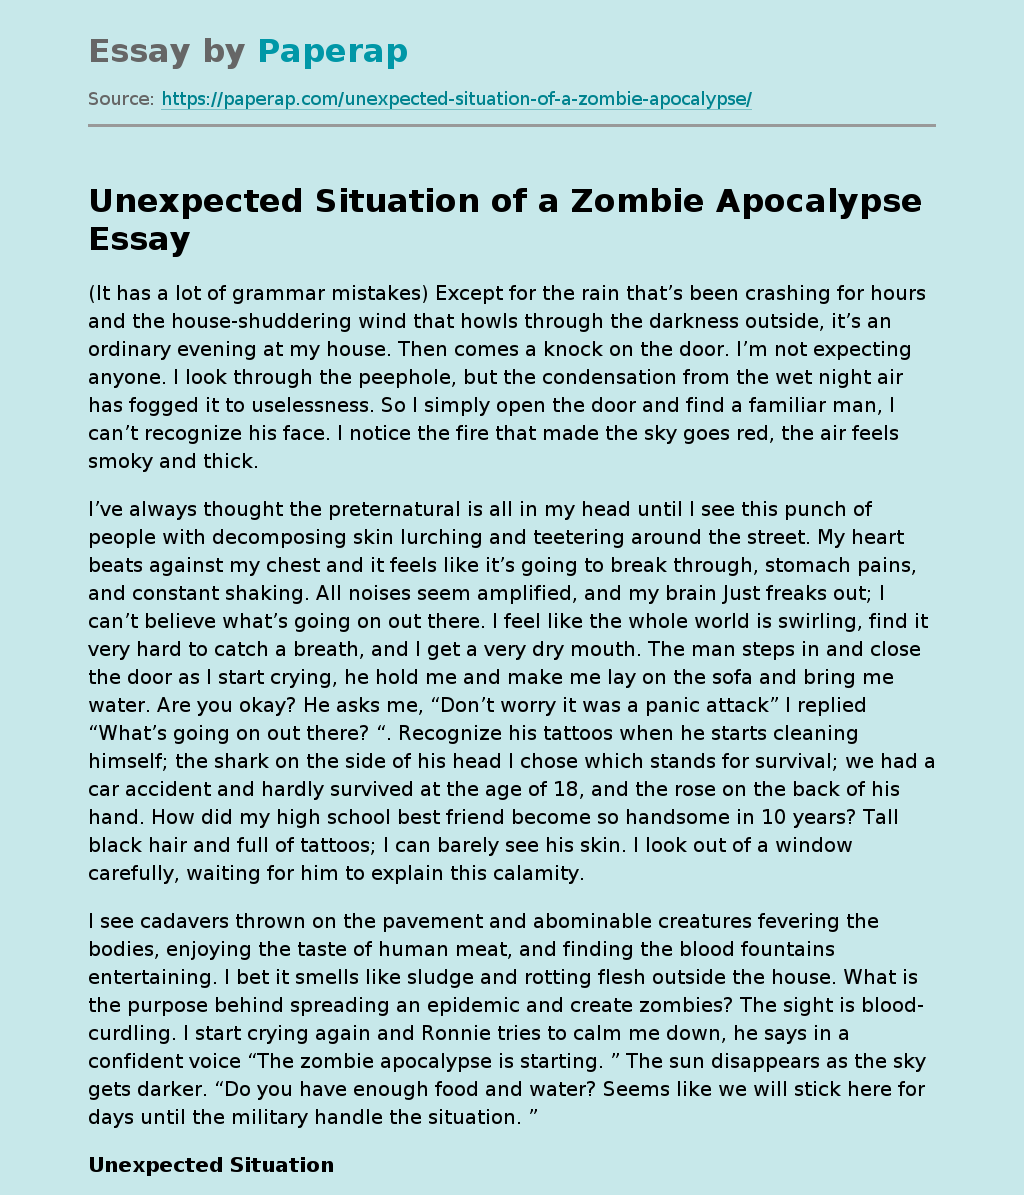 Unexpected Situation of a Zombie Apocalypse